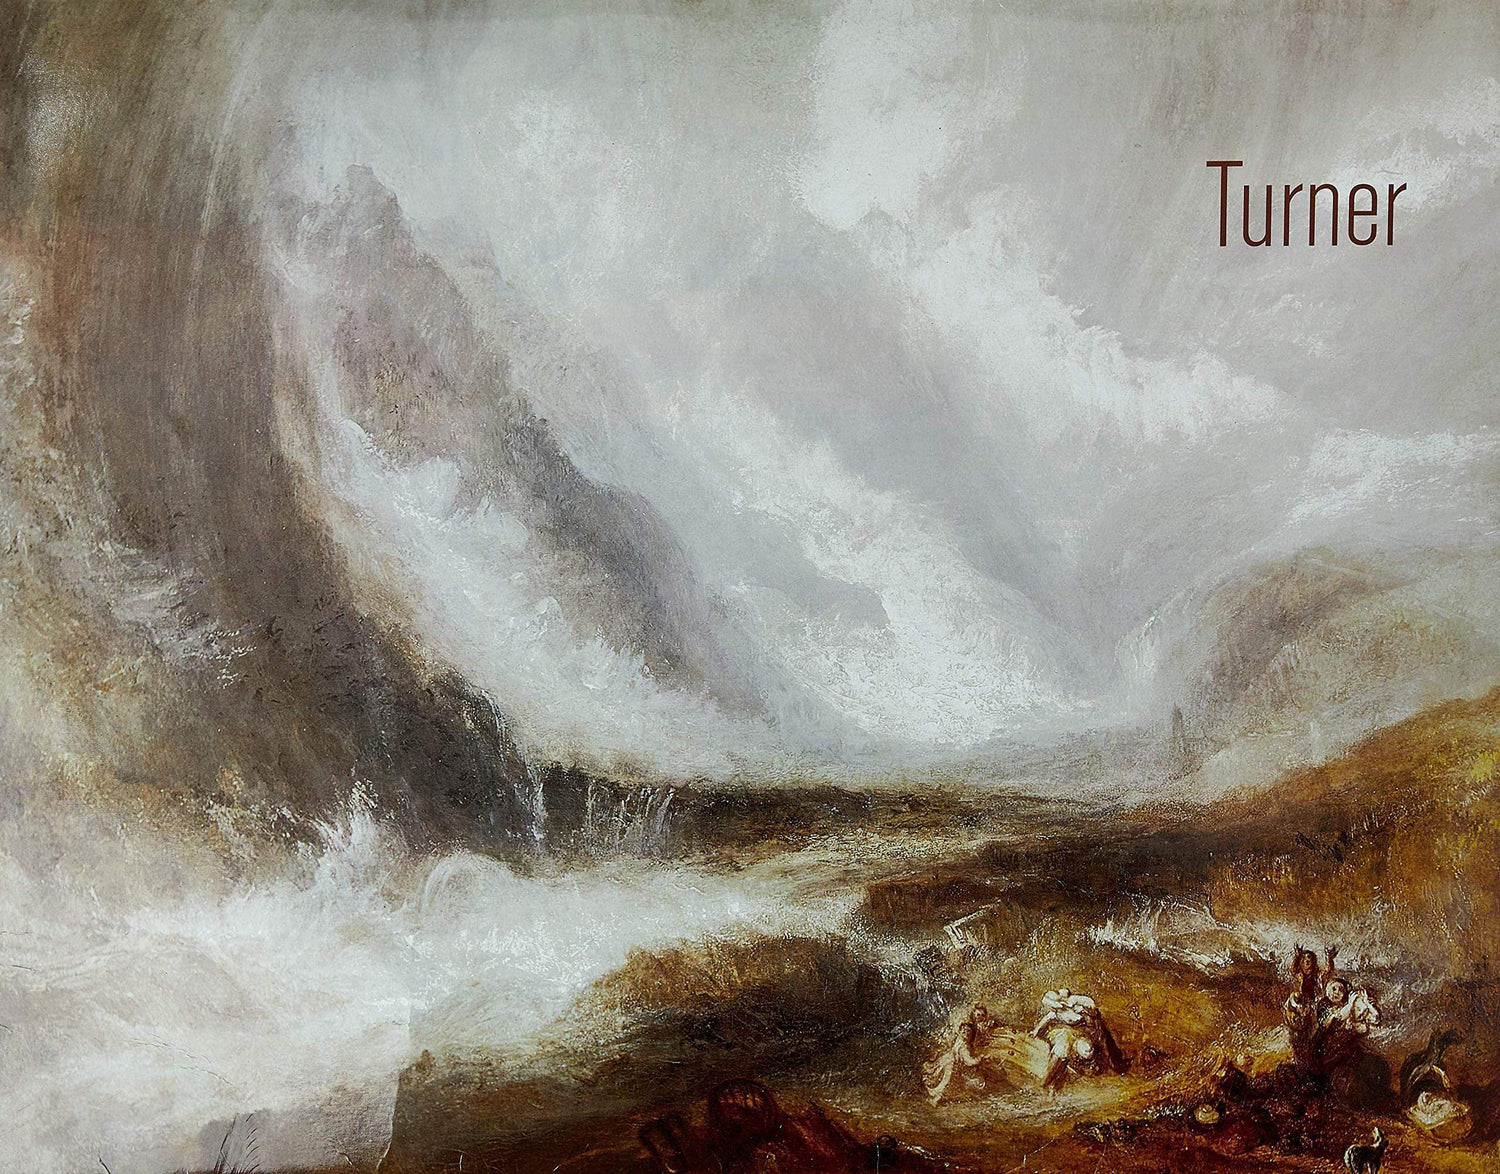 POSTERS: TURNER (THE POSTER COLLECTION)